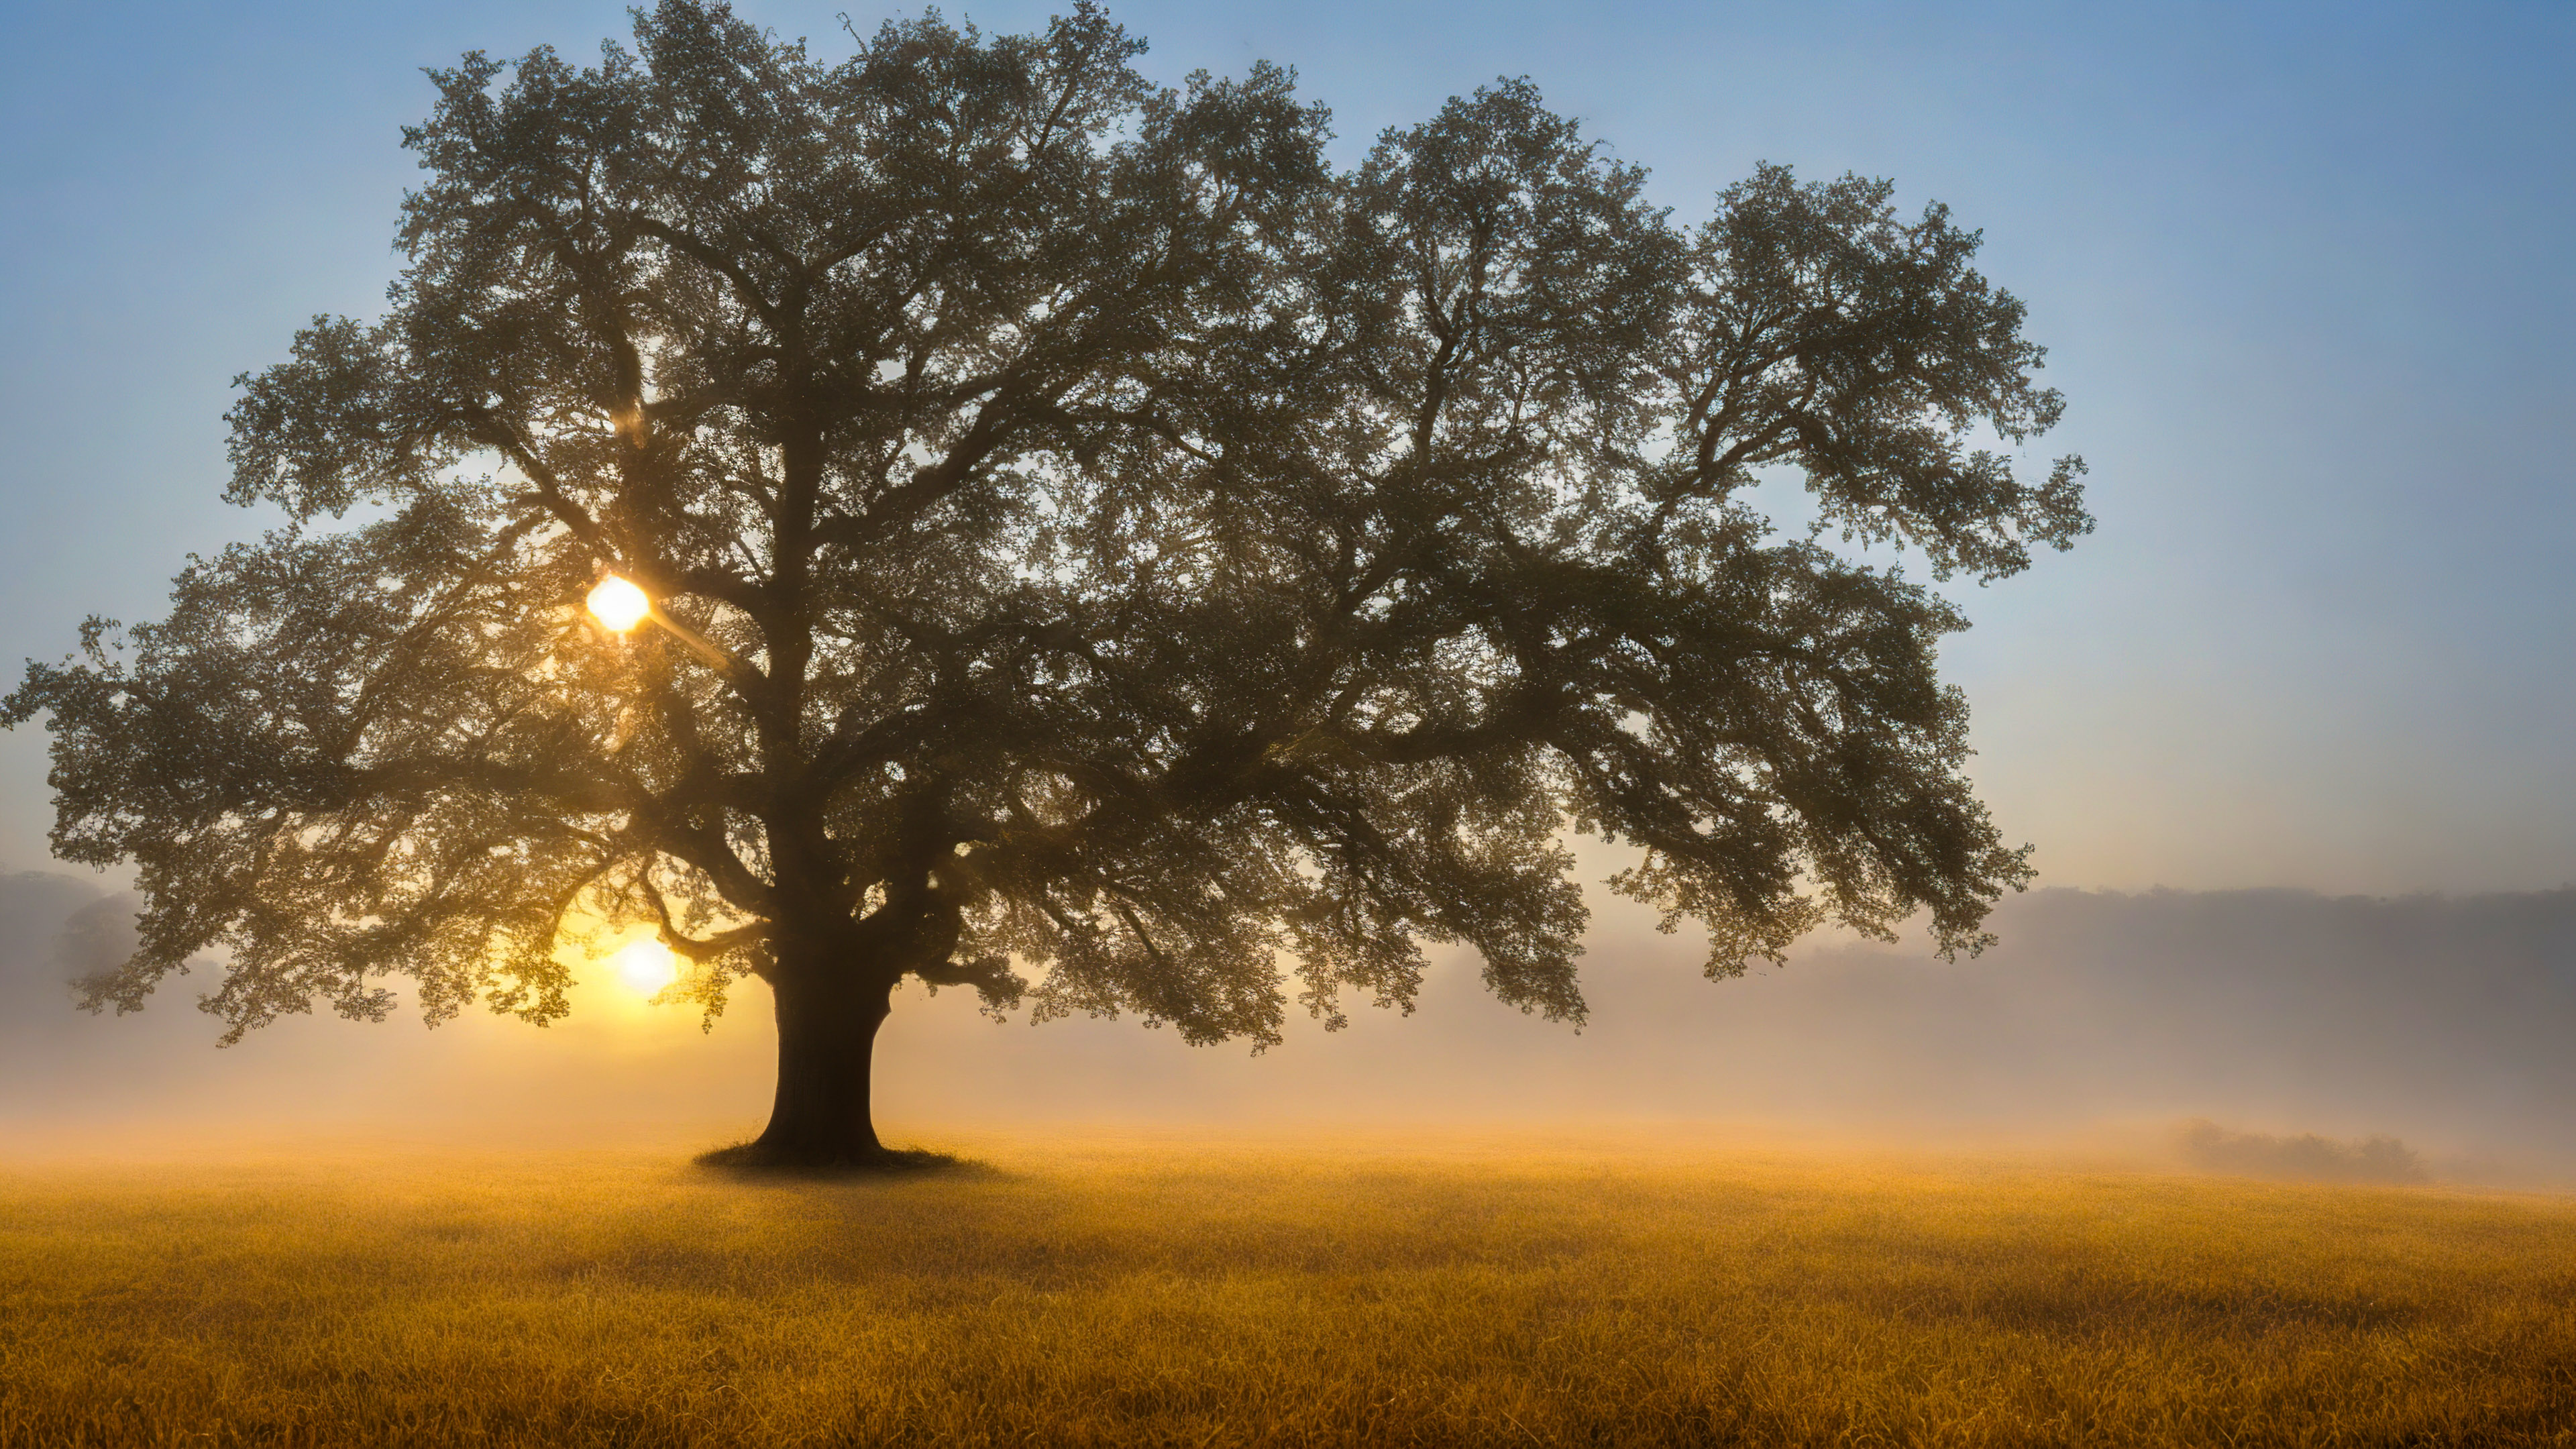 Experience the solitude with our beautiful scenery wall paper, featuring a majestic oak tree standing alone in a misty field, with a backdrop of the rising sun.